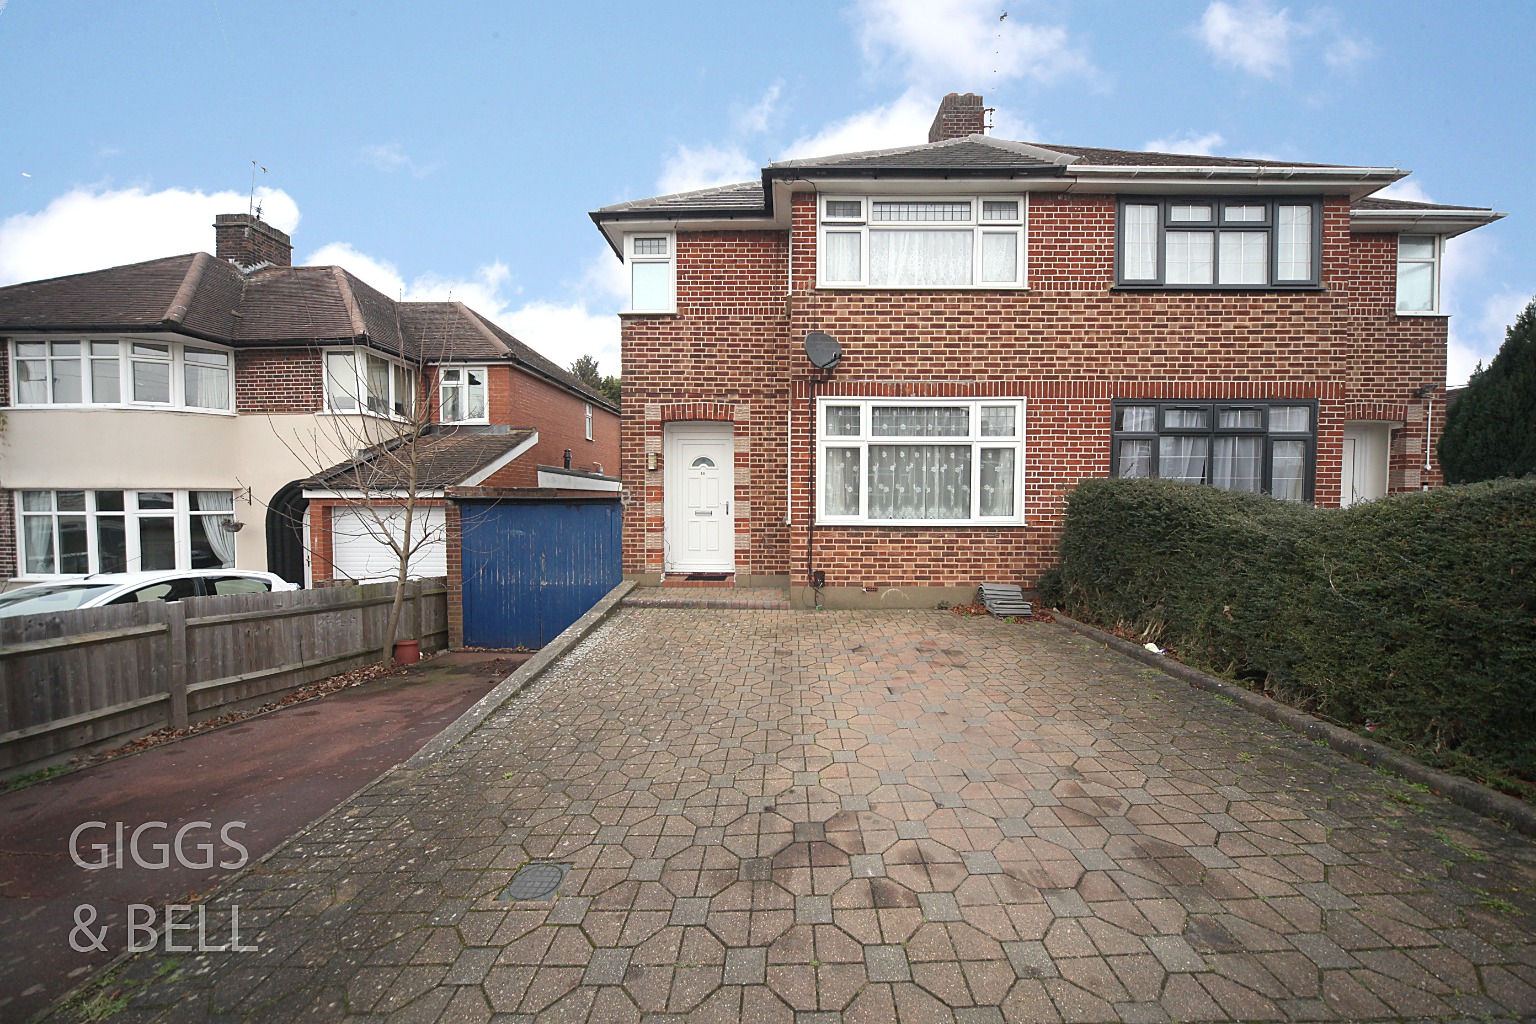 3 bed semi-detached house for sale in Felstead Close, Luton, LU2 